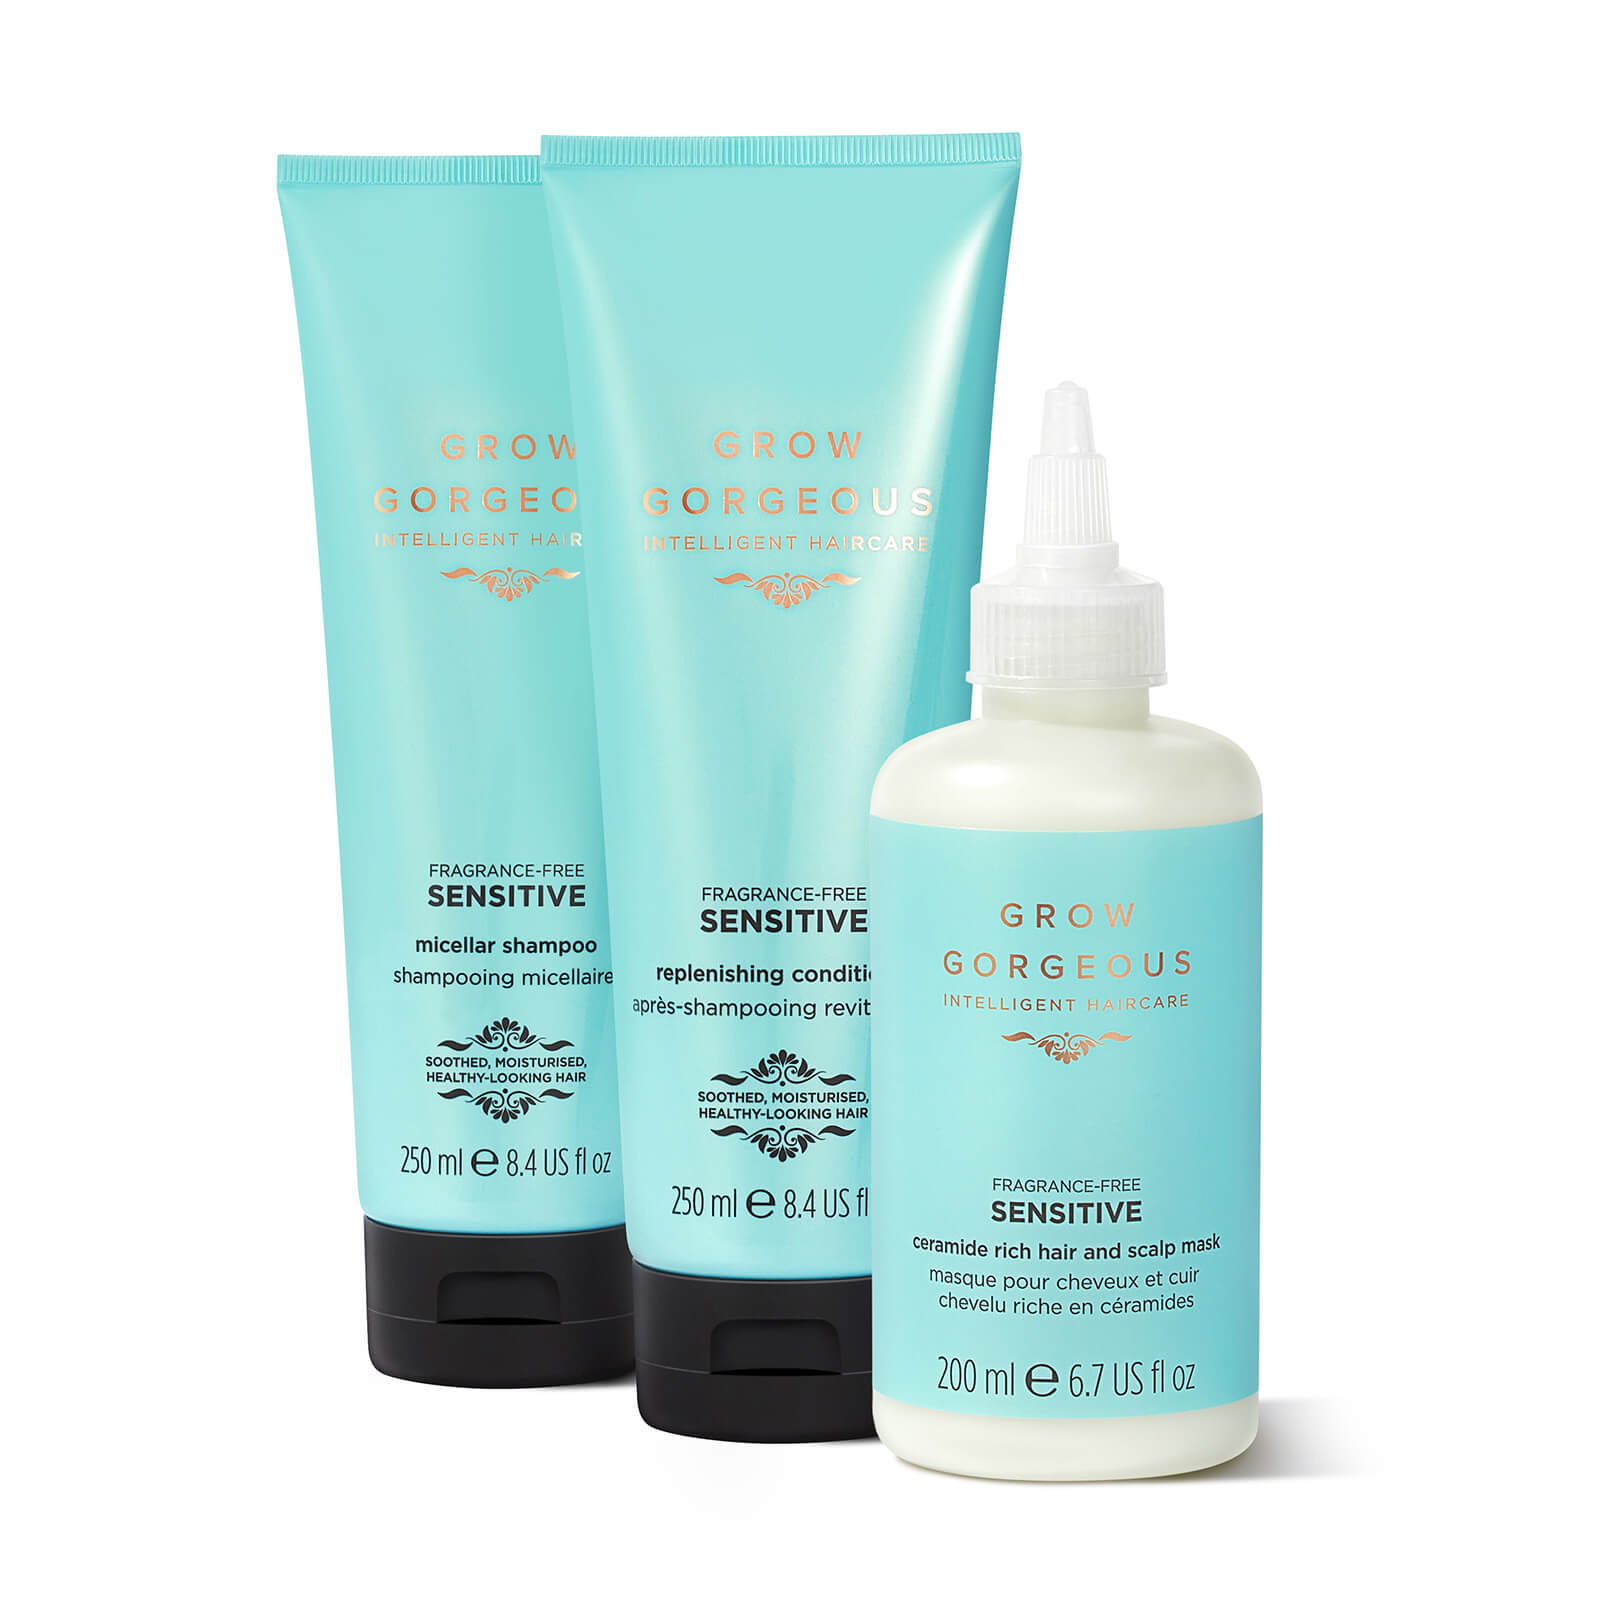 Grow Gorgeous Sensitive Collection (worth $64.00) In Blue